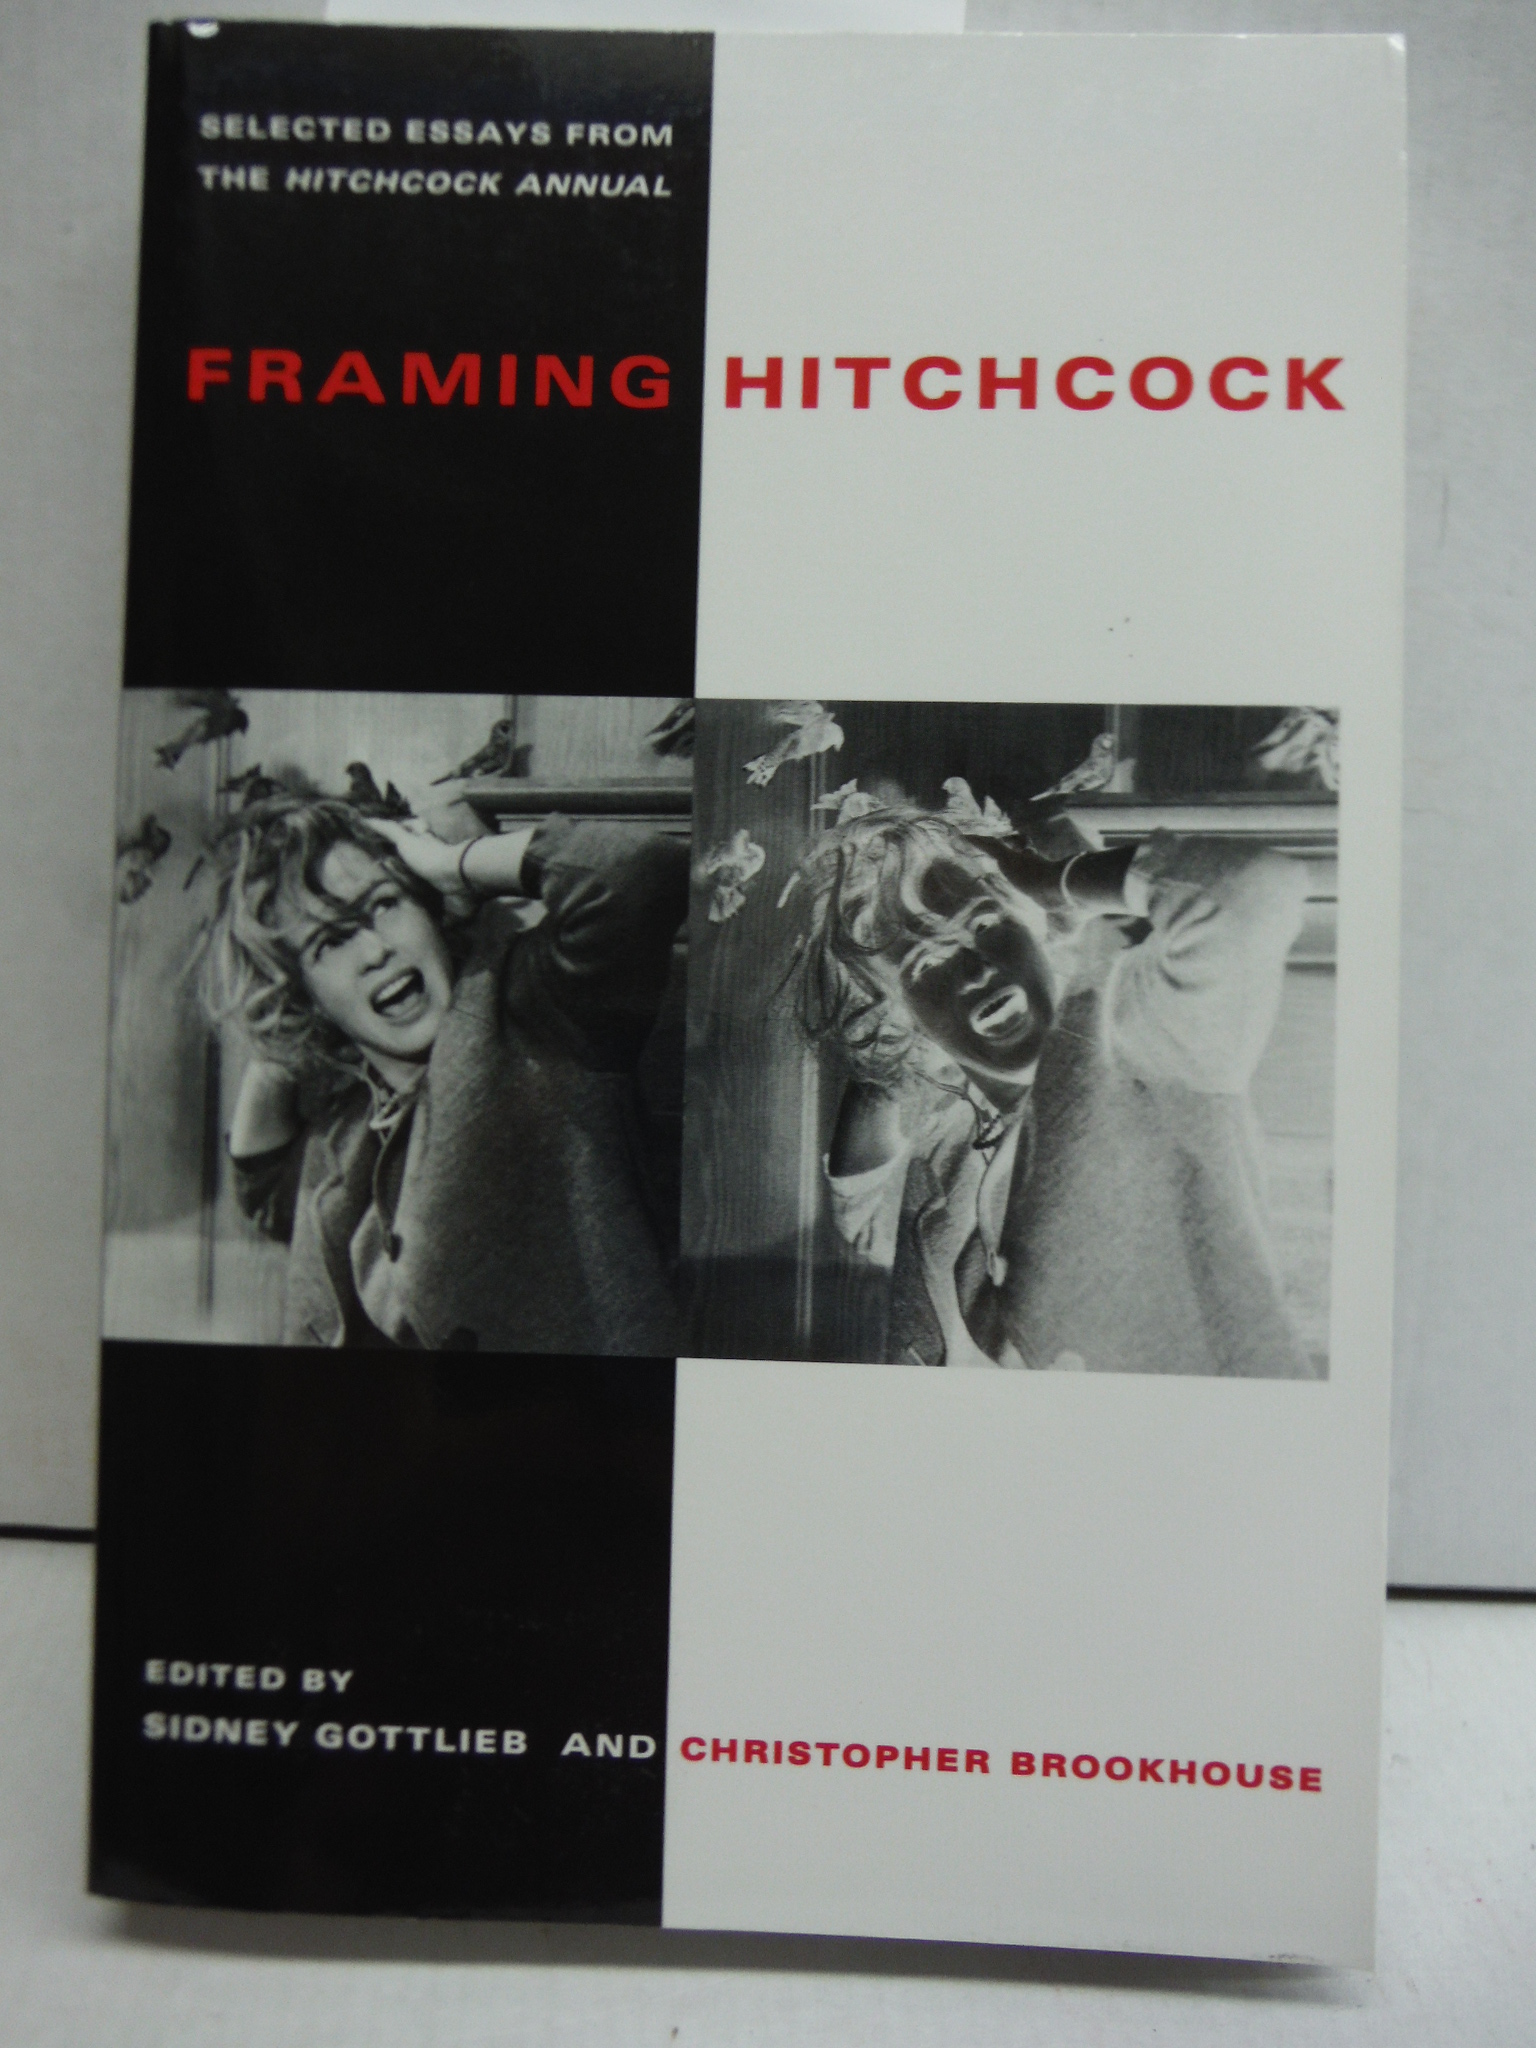 Framing Hitchcock: Selected Essays from the Hitchcock Annual (Contemporary Appro